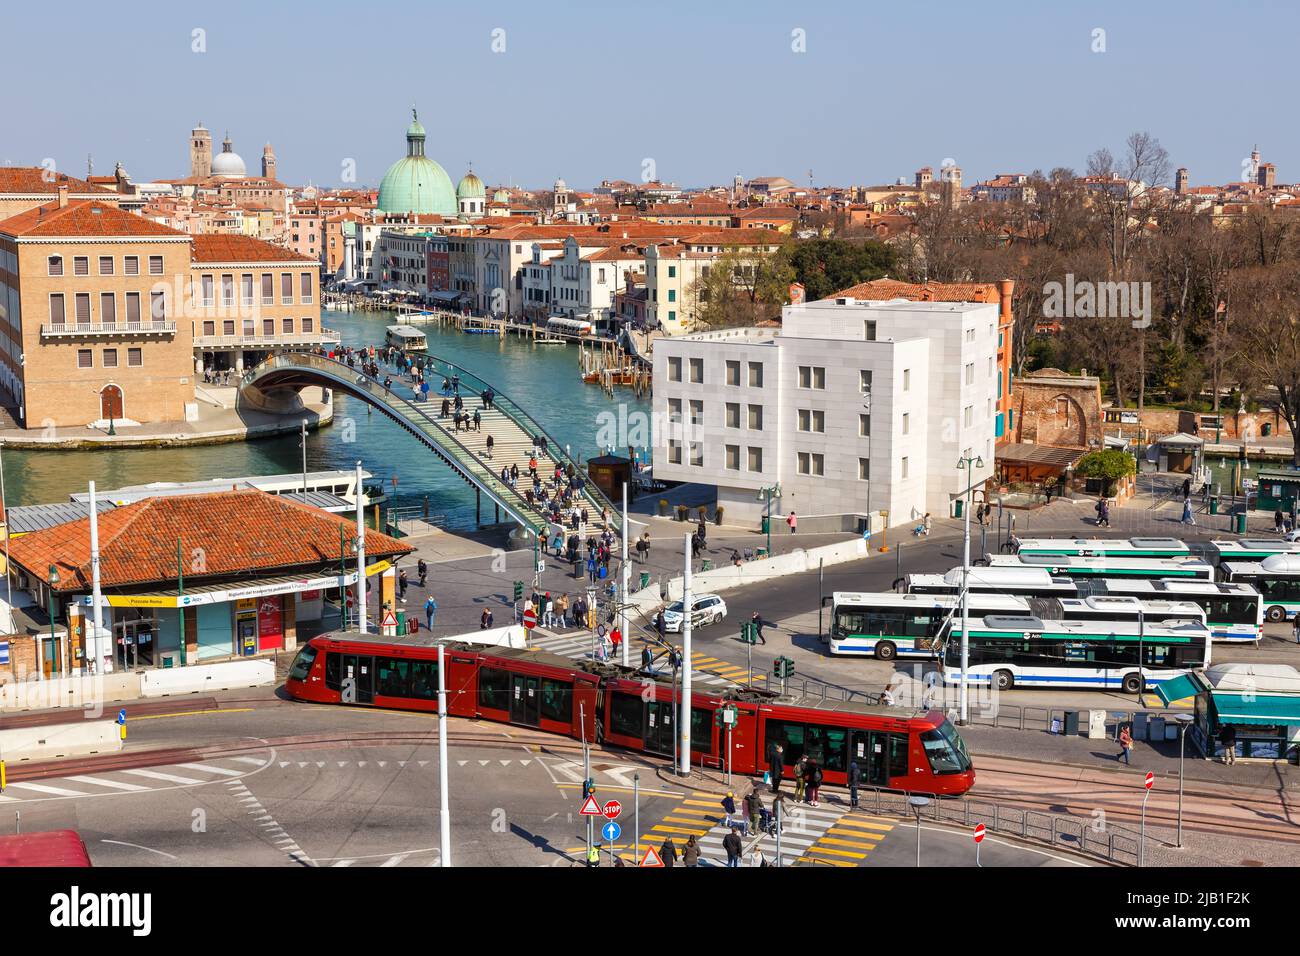 Venice, Italy - March 20, 2022: Rubber-tyred tram and bus station at Piazzale Roma public transport in Venice, Italy. Stock Photo